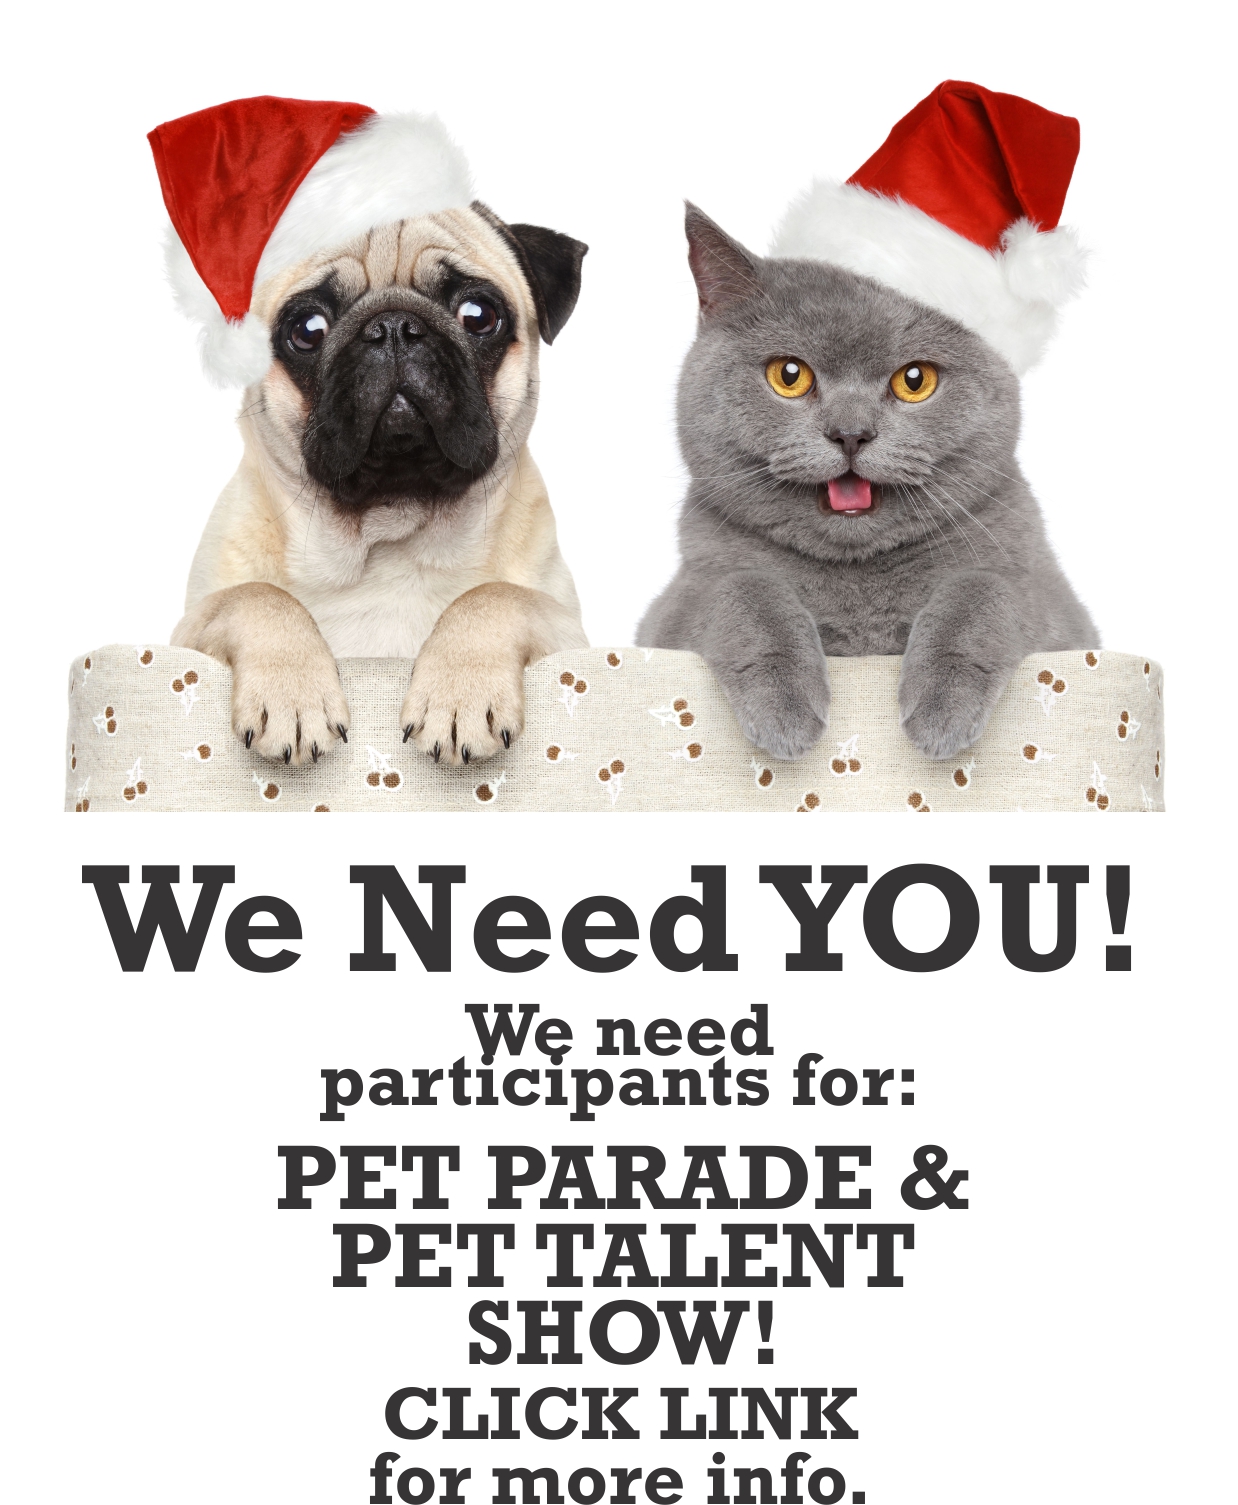 We need you! We are looking for vendors to make our event meow-tastic!